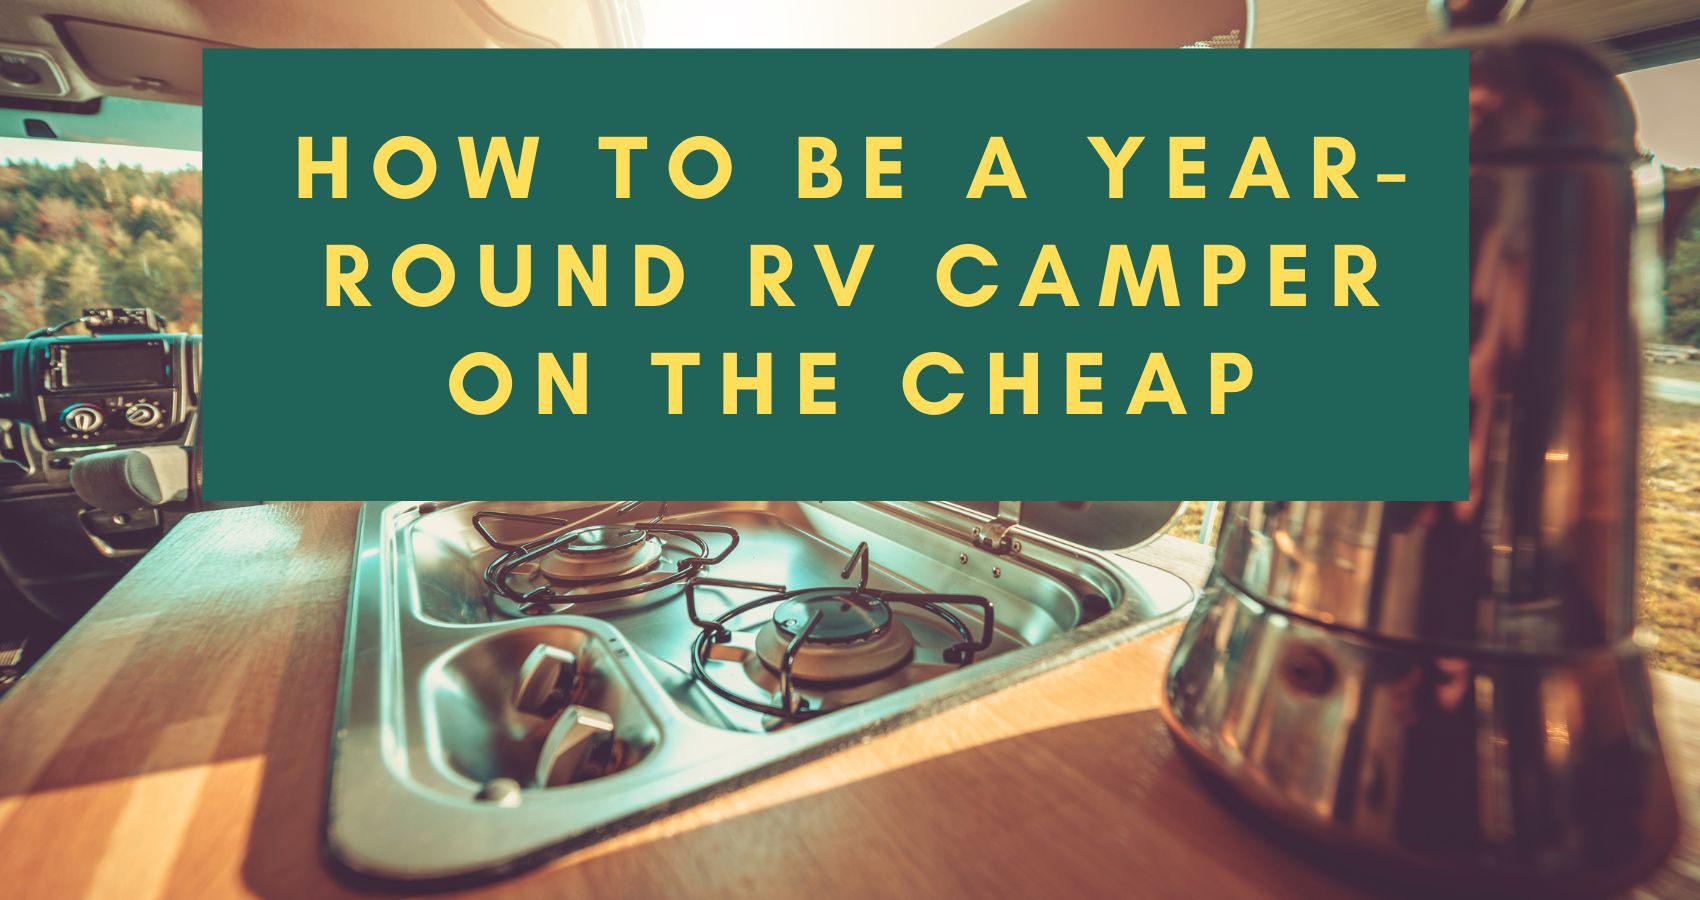 How to Be a Year-Round RV Camper on the Cheap